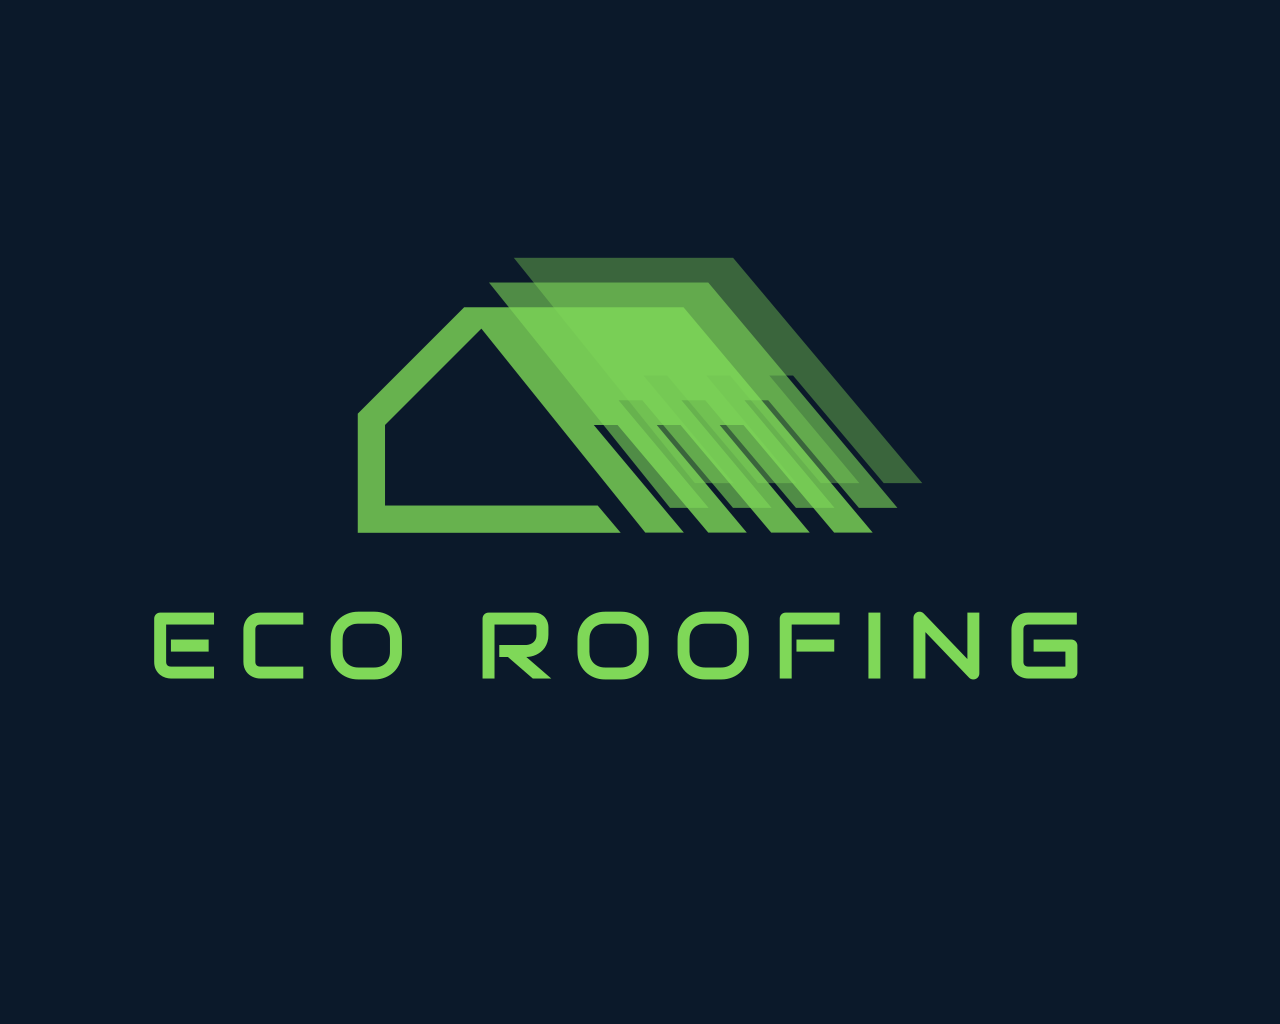 Eco Roofing 's web page